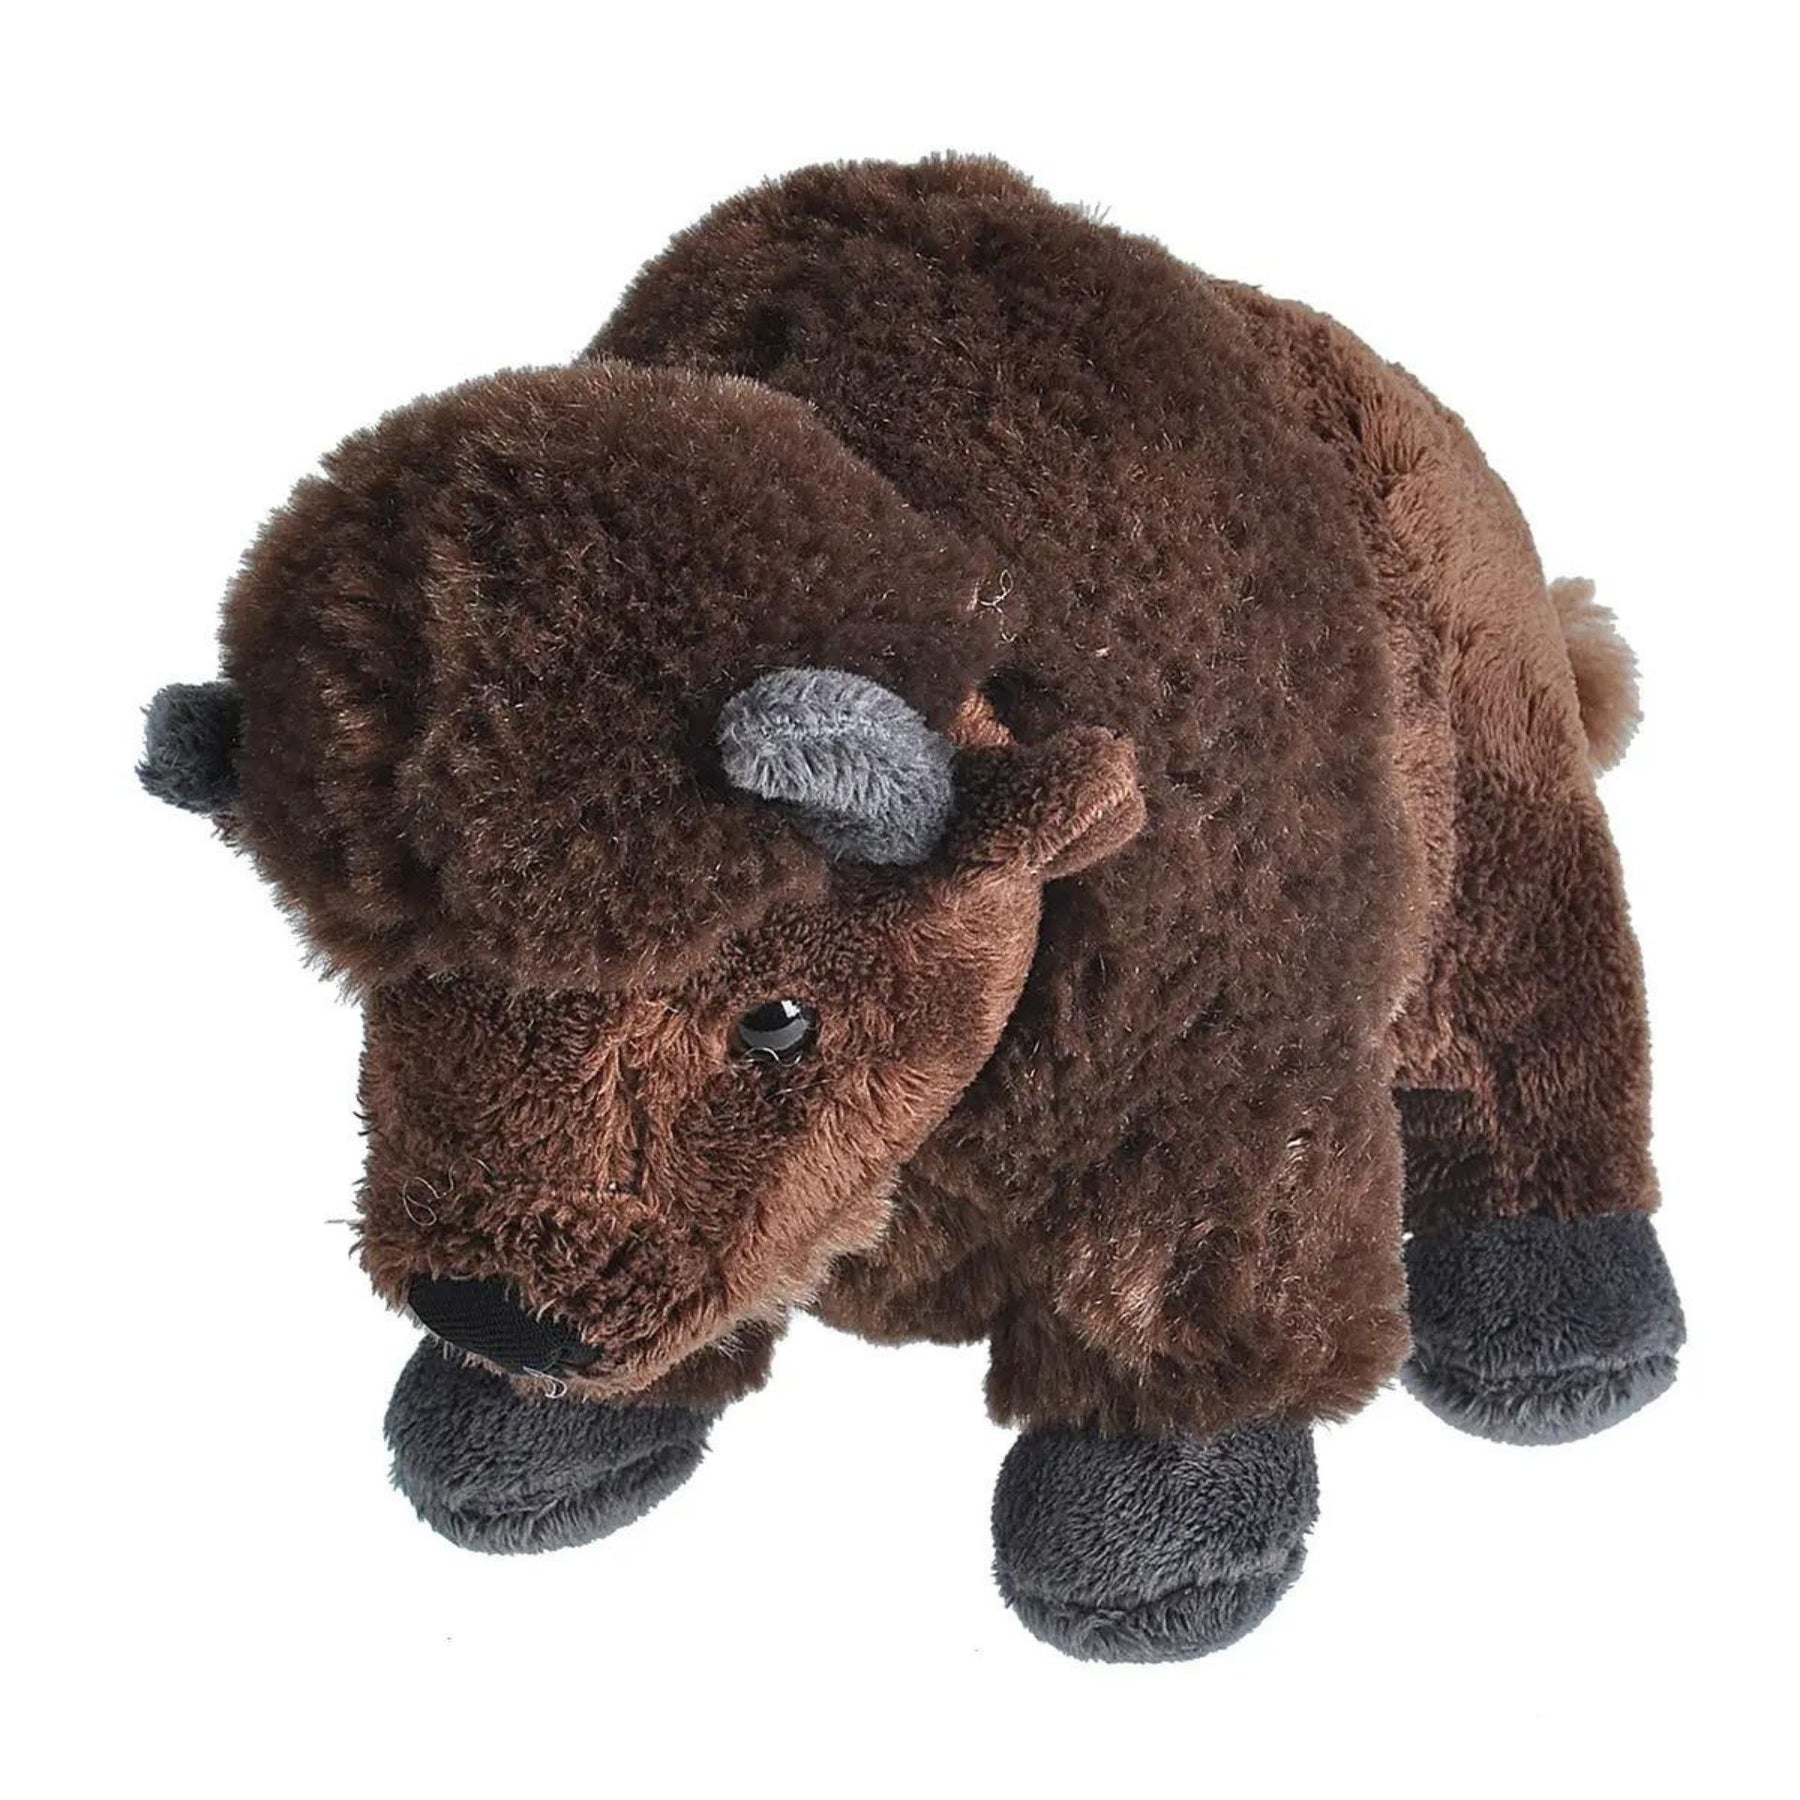 Plush Bison-Southern Agriculture